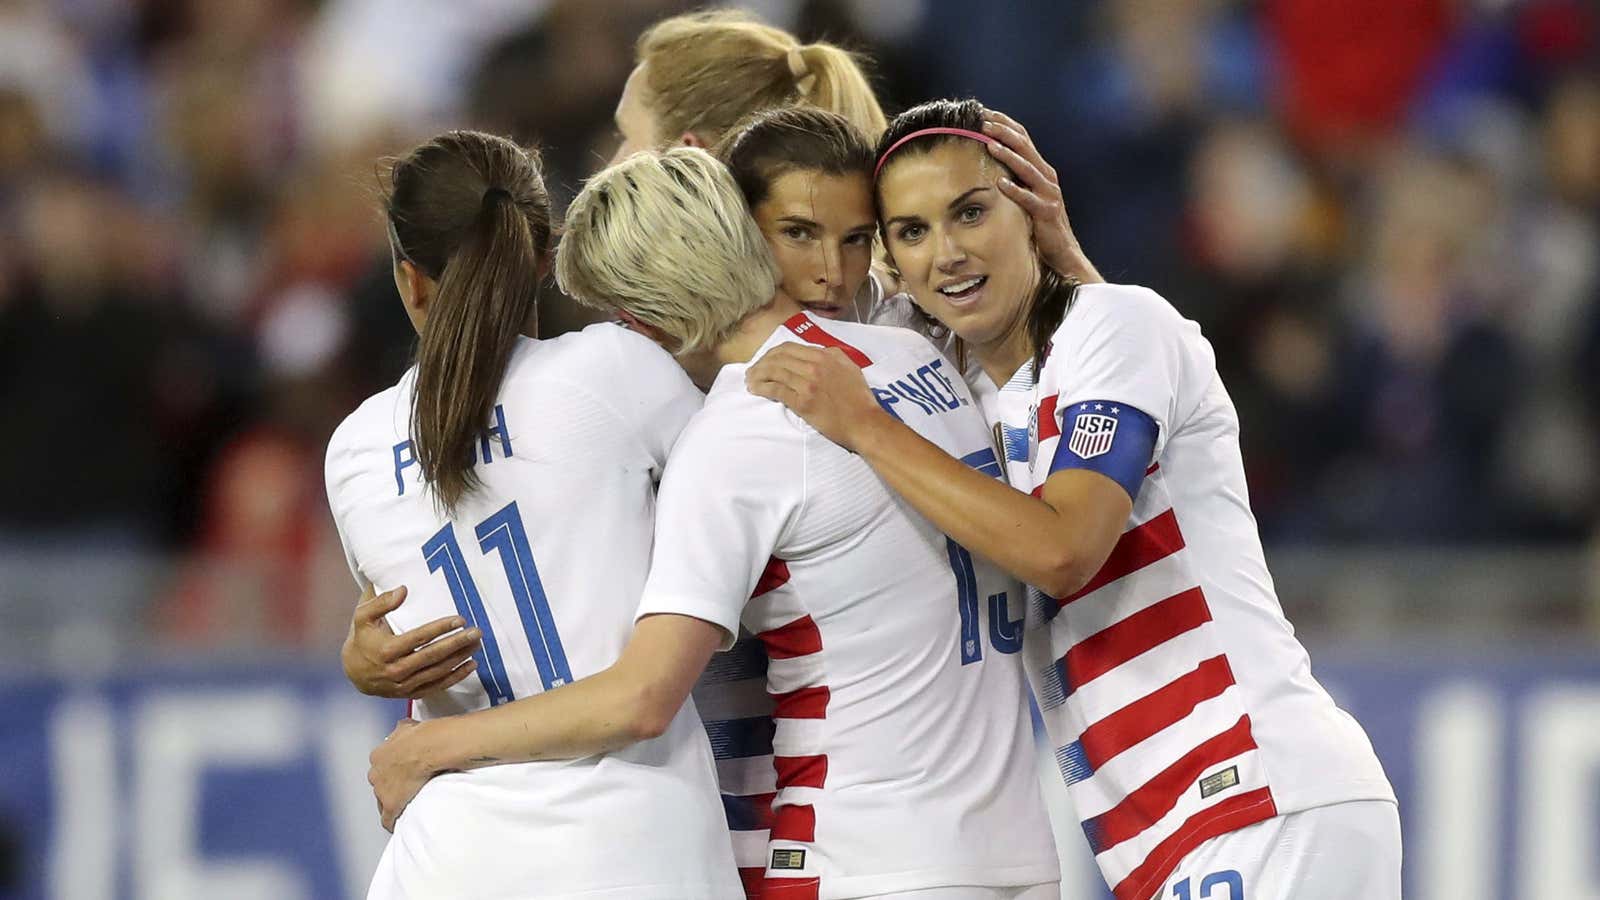 The U.S. men's and women's soccer teams will be paid equally under